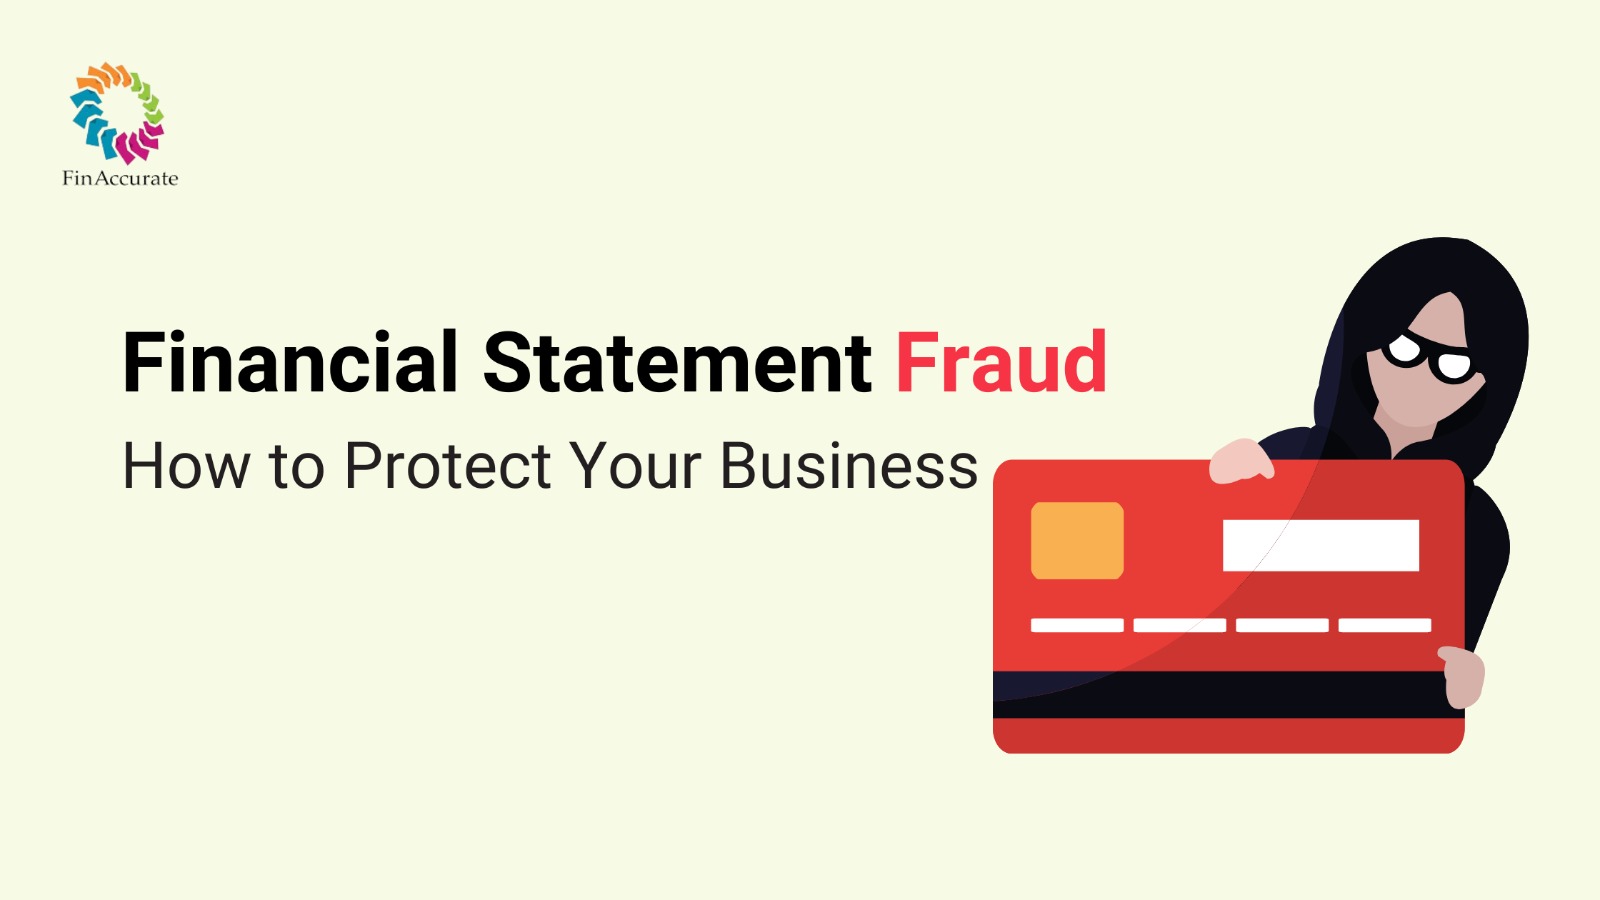 Financial Statement Fraud: How to Protect Your Business